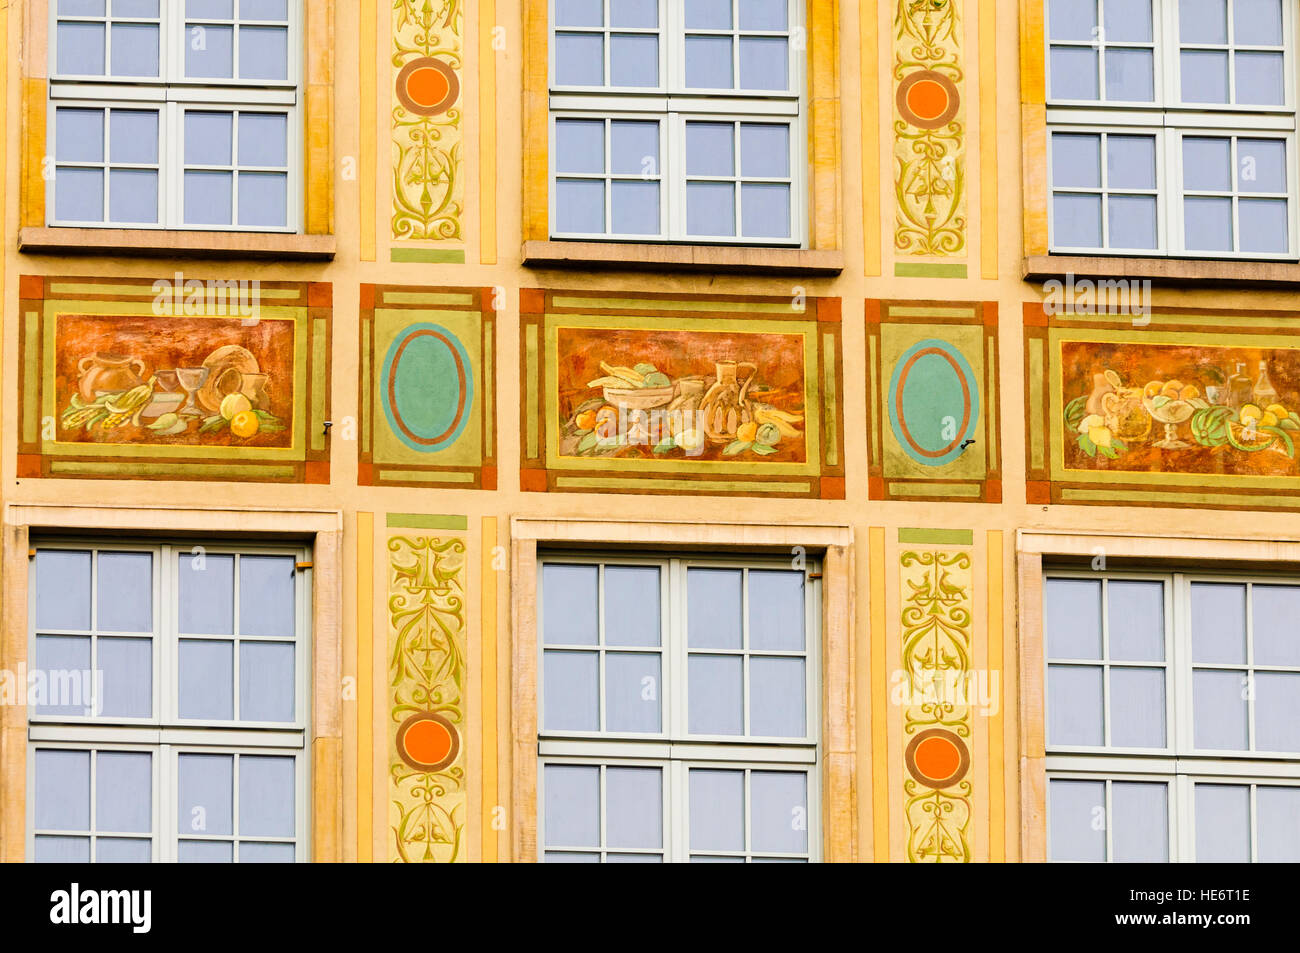 Building with very ornate mural paintings on its fascade in Dluga, Dlugi Targ, Gdansk Stock Photo